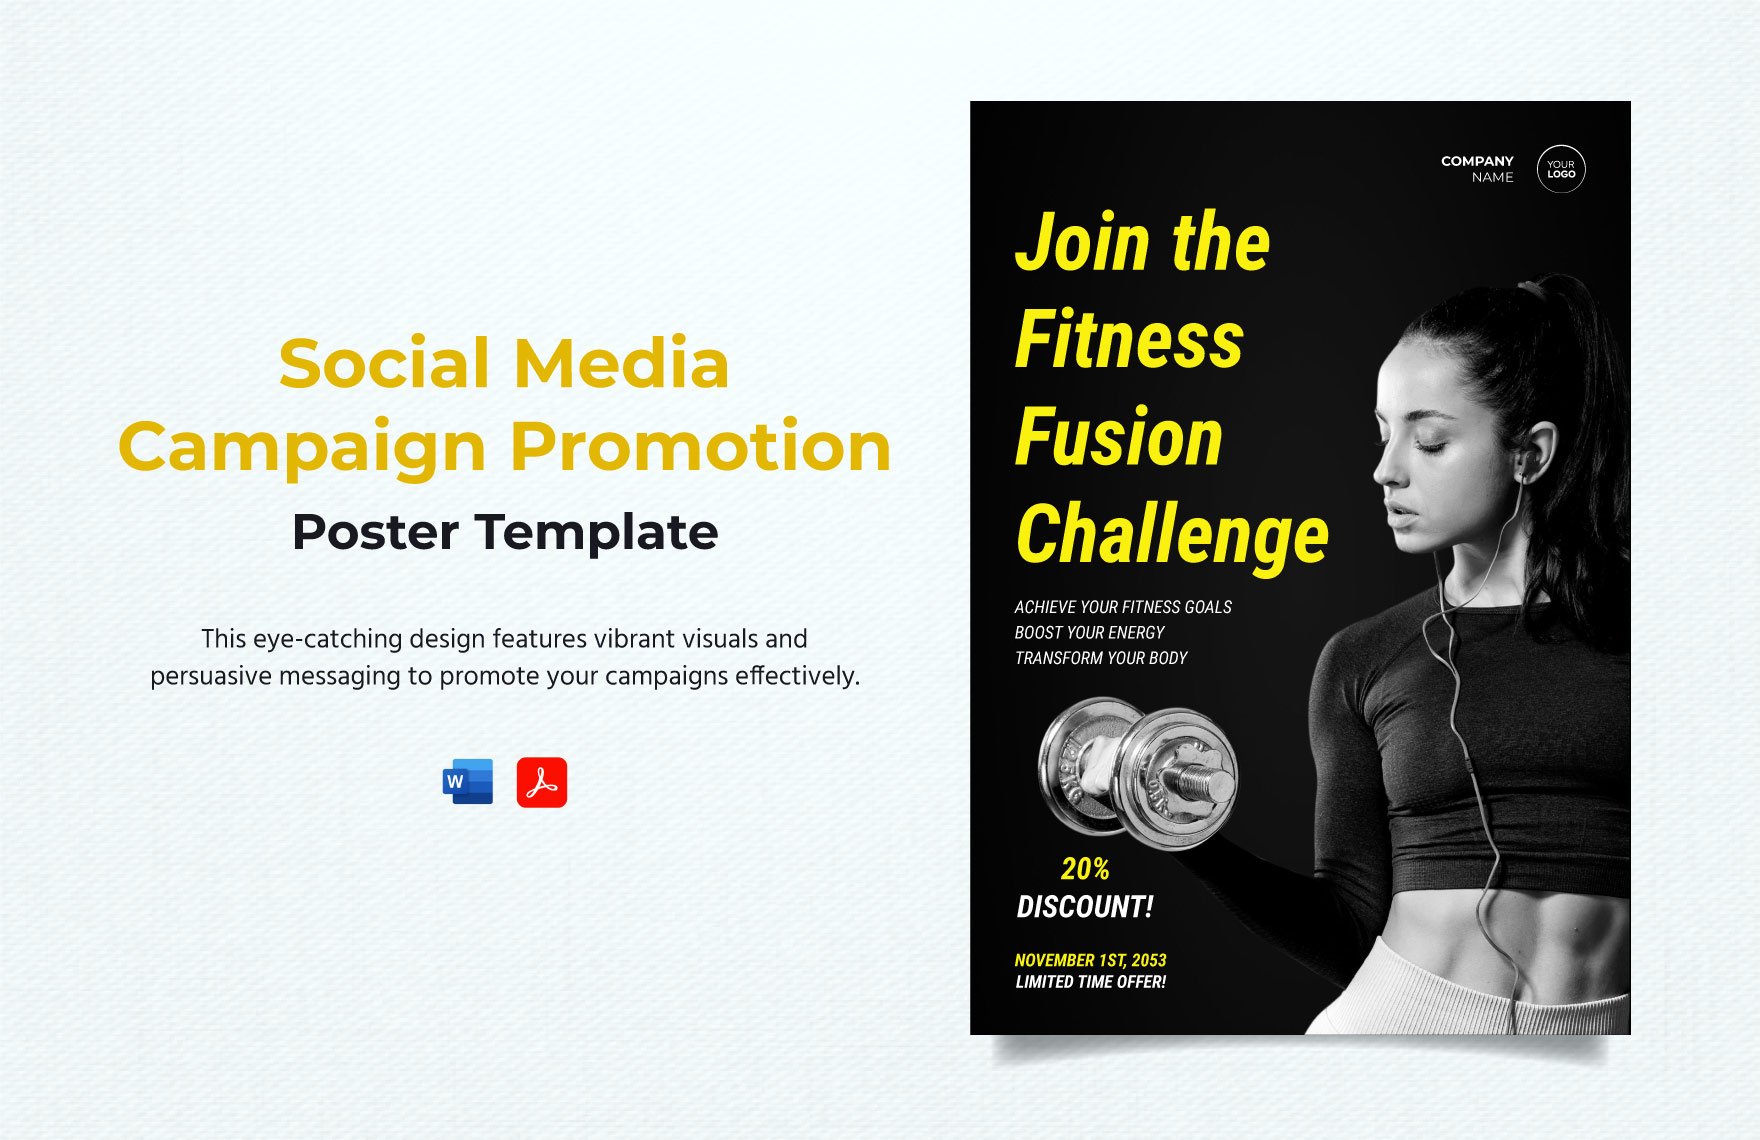 Social Media Campaign Promotion Poster Template